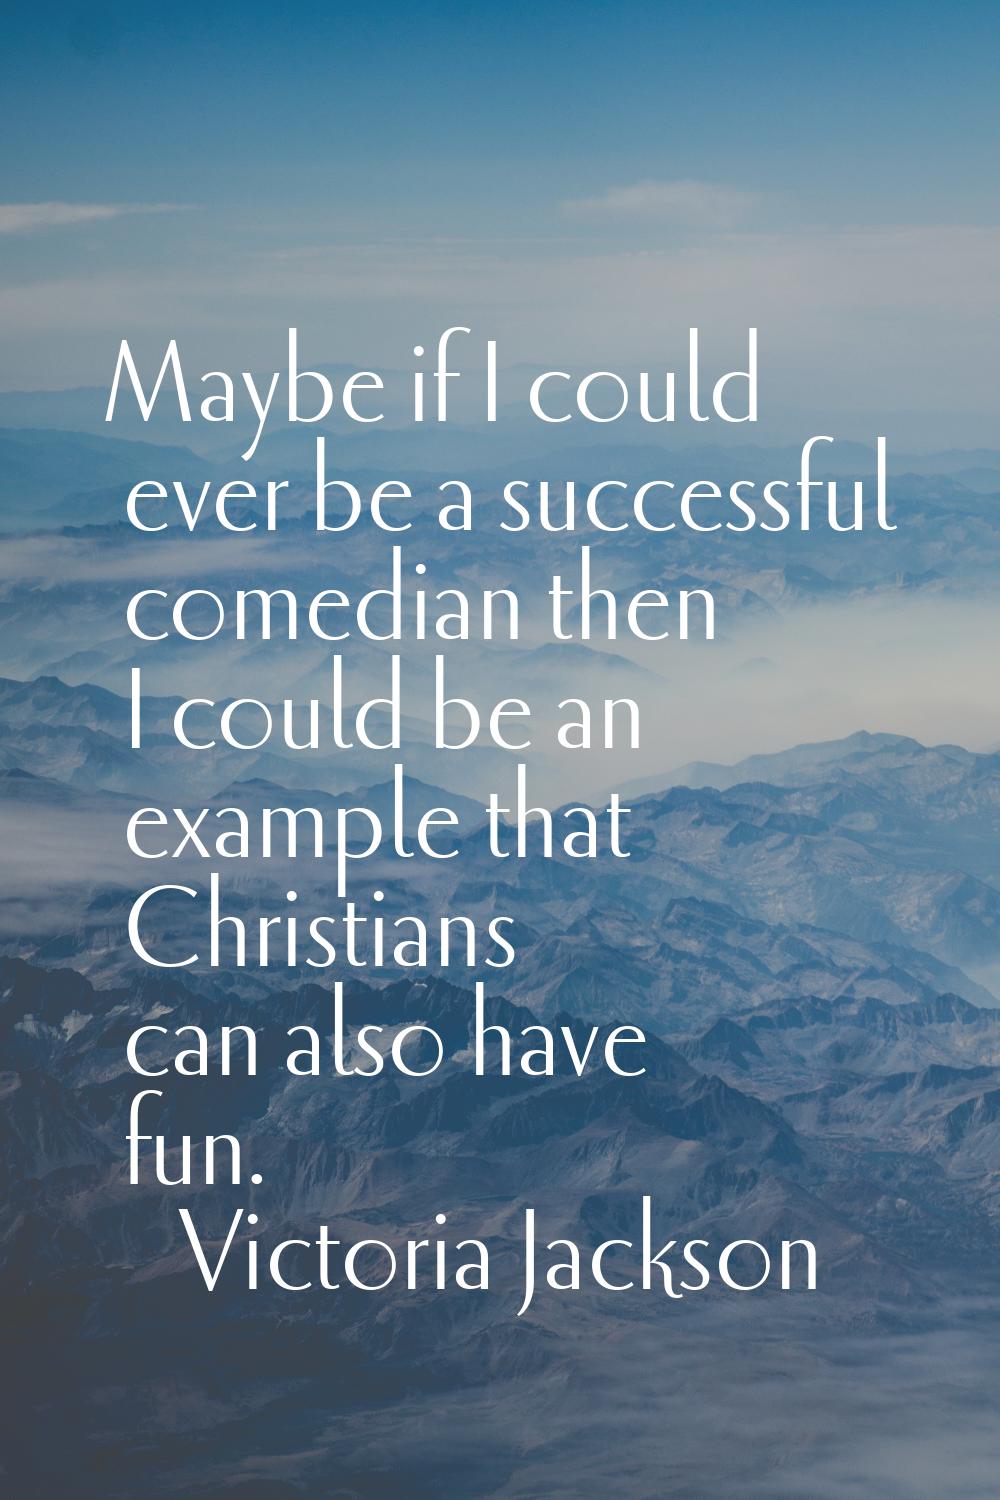 Maybe if I could ever be a successful comedian then I could be an example that Christians can also 